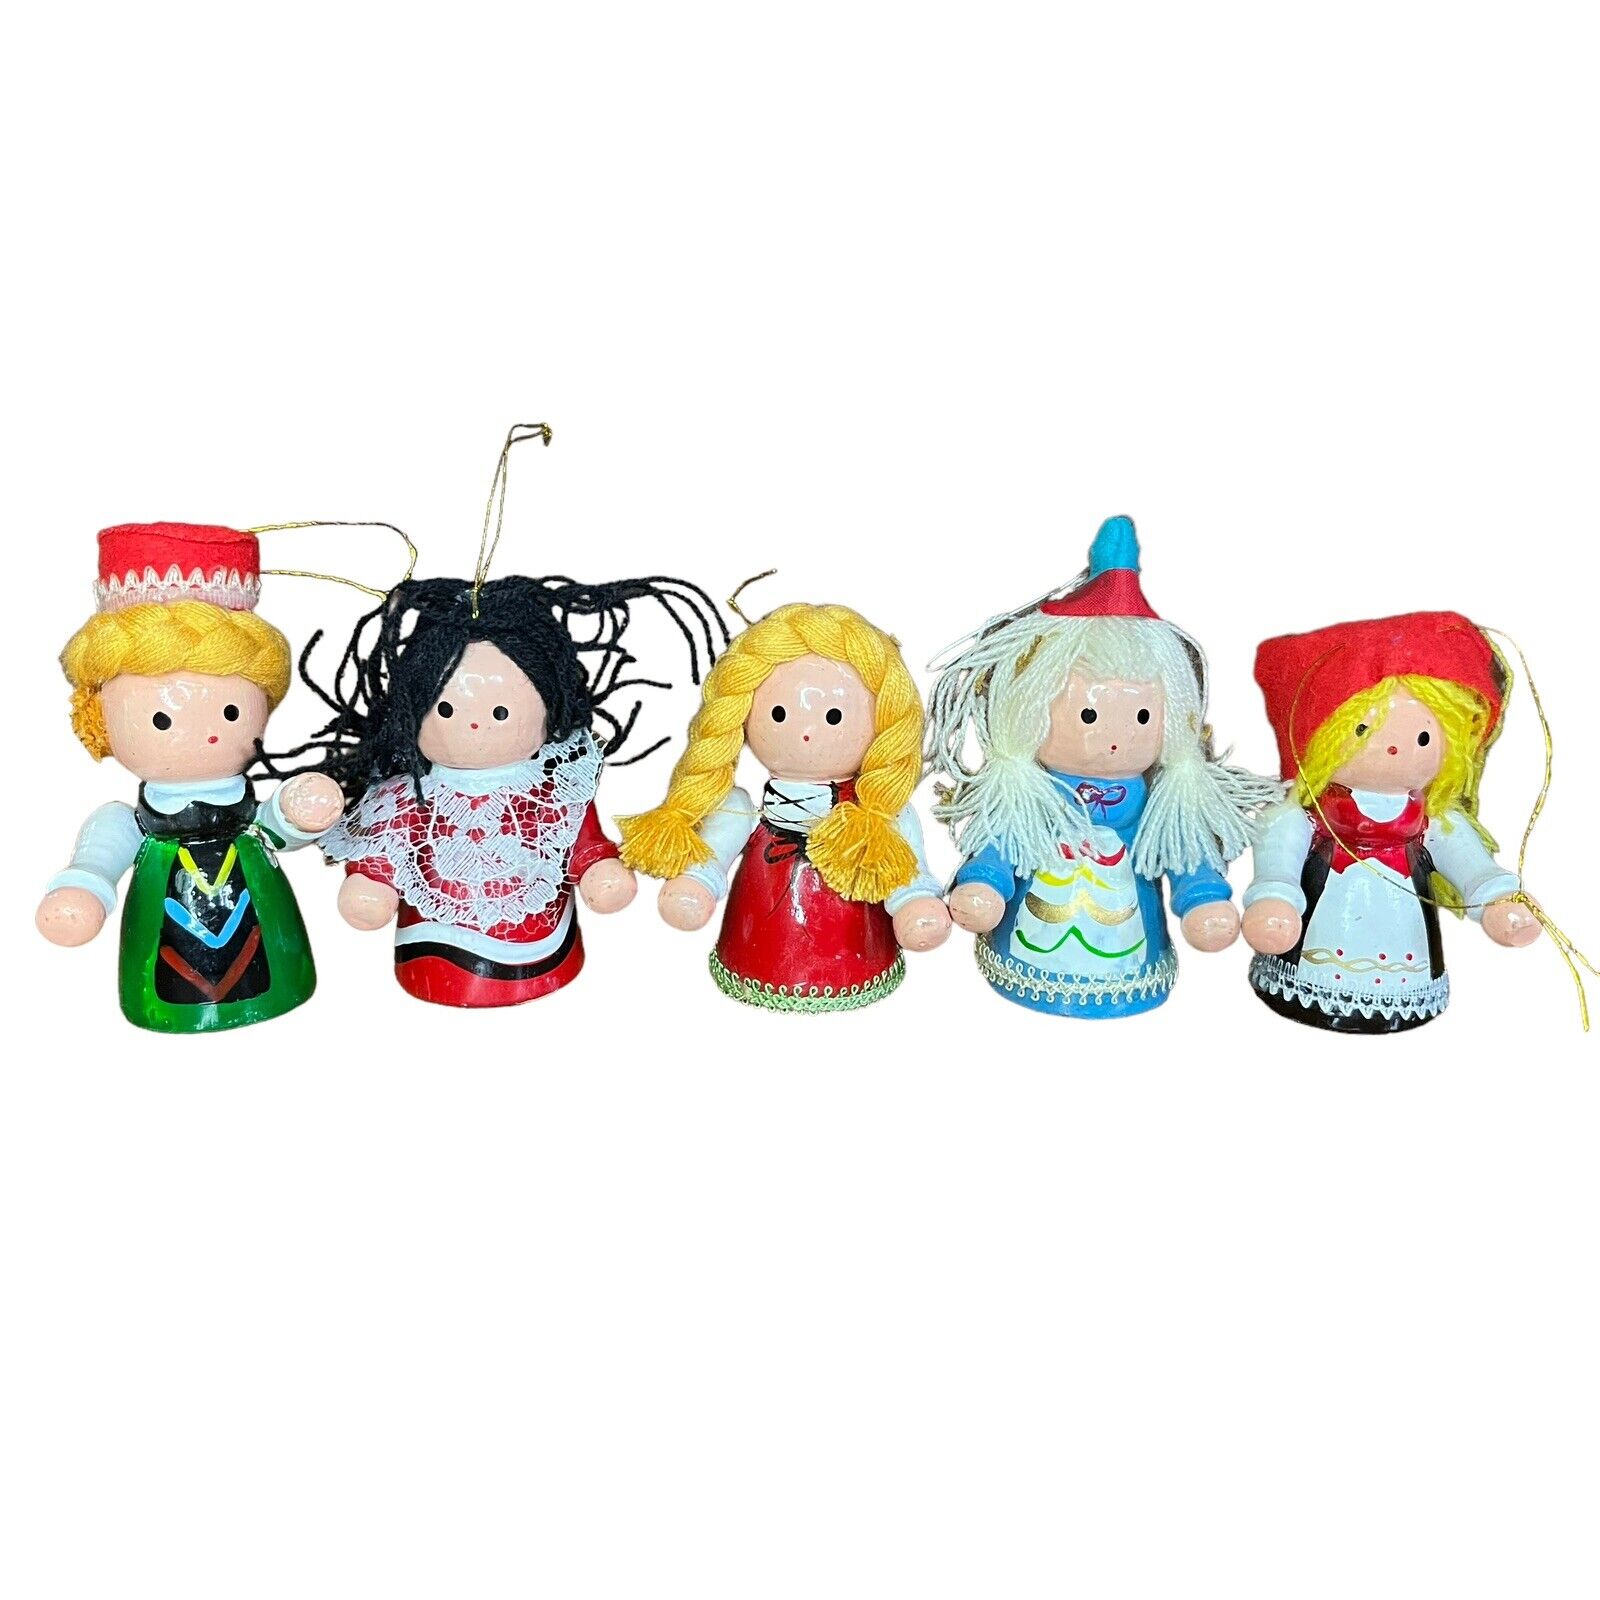 Vintage 80’s Handmade Wooden Christmas Ornaments Nationality Dolls Set of 5